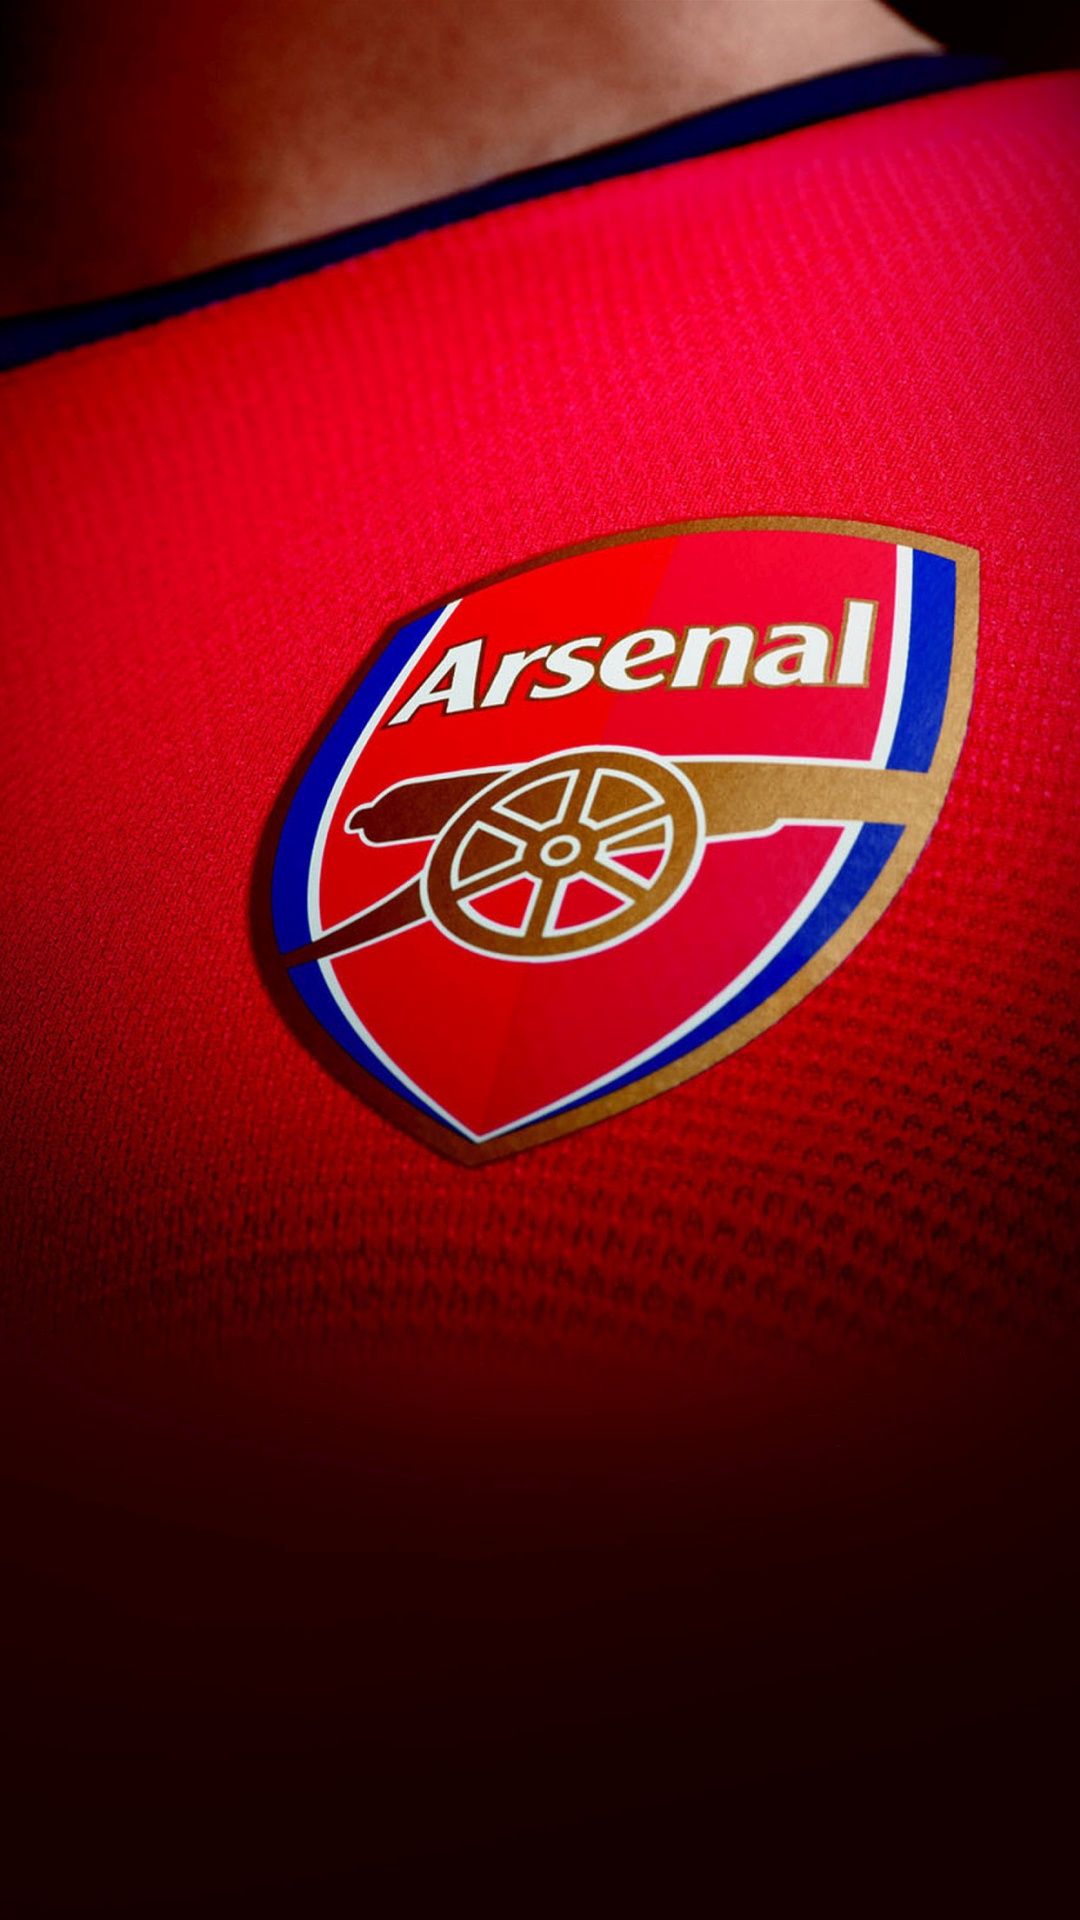 Arsenal Wallpaper for iPhone Free